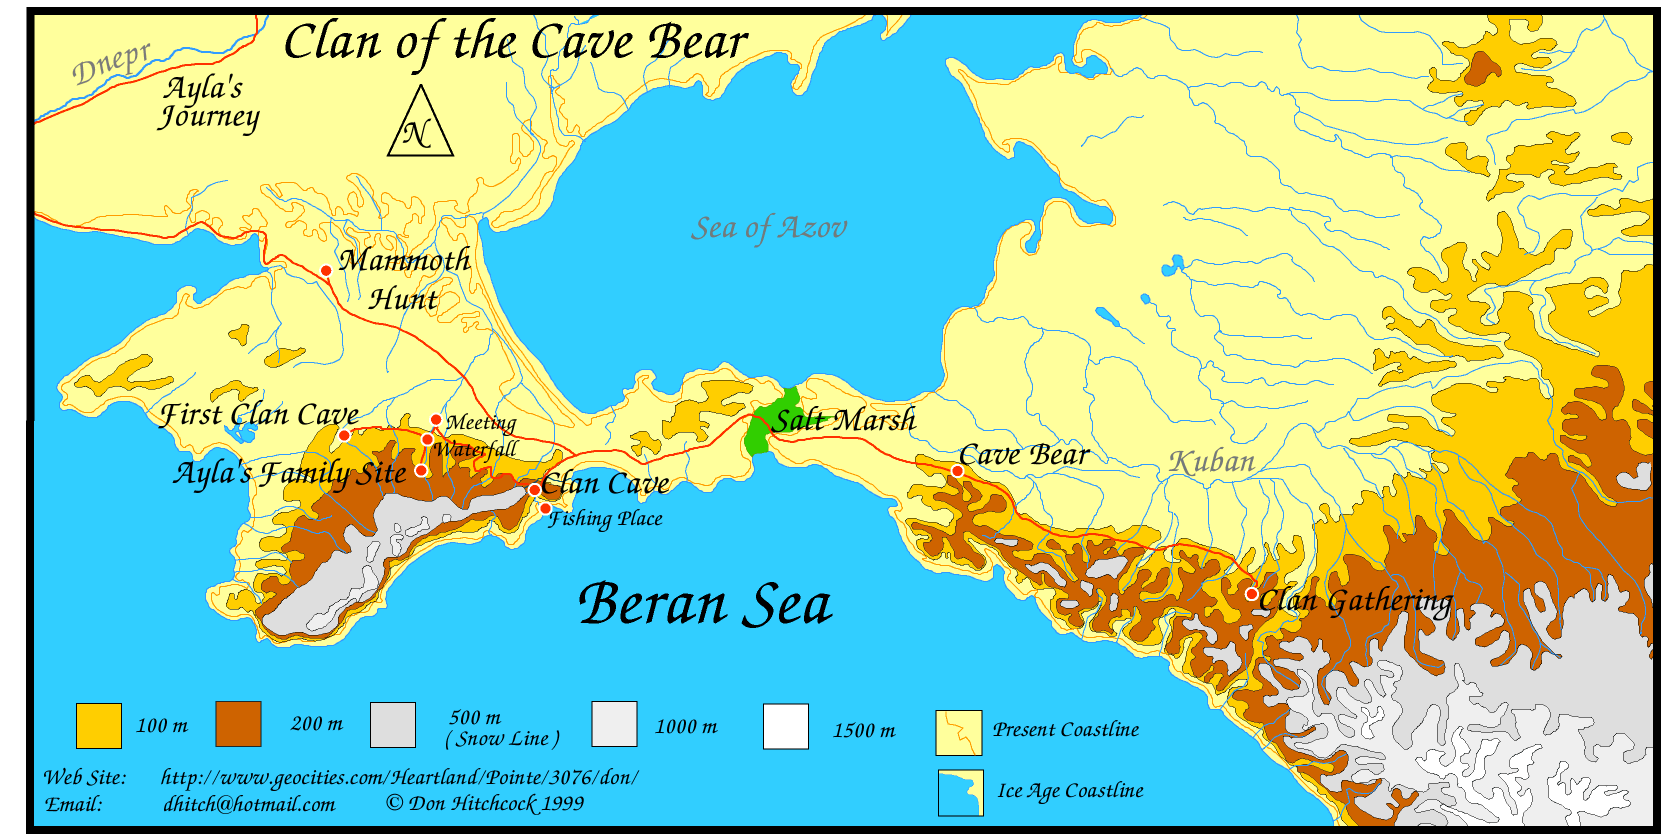 Clan Of The Cave Bear #4